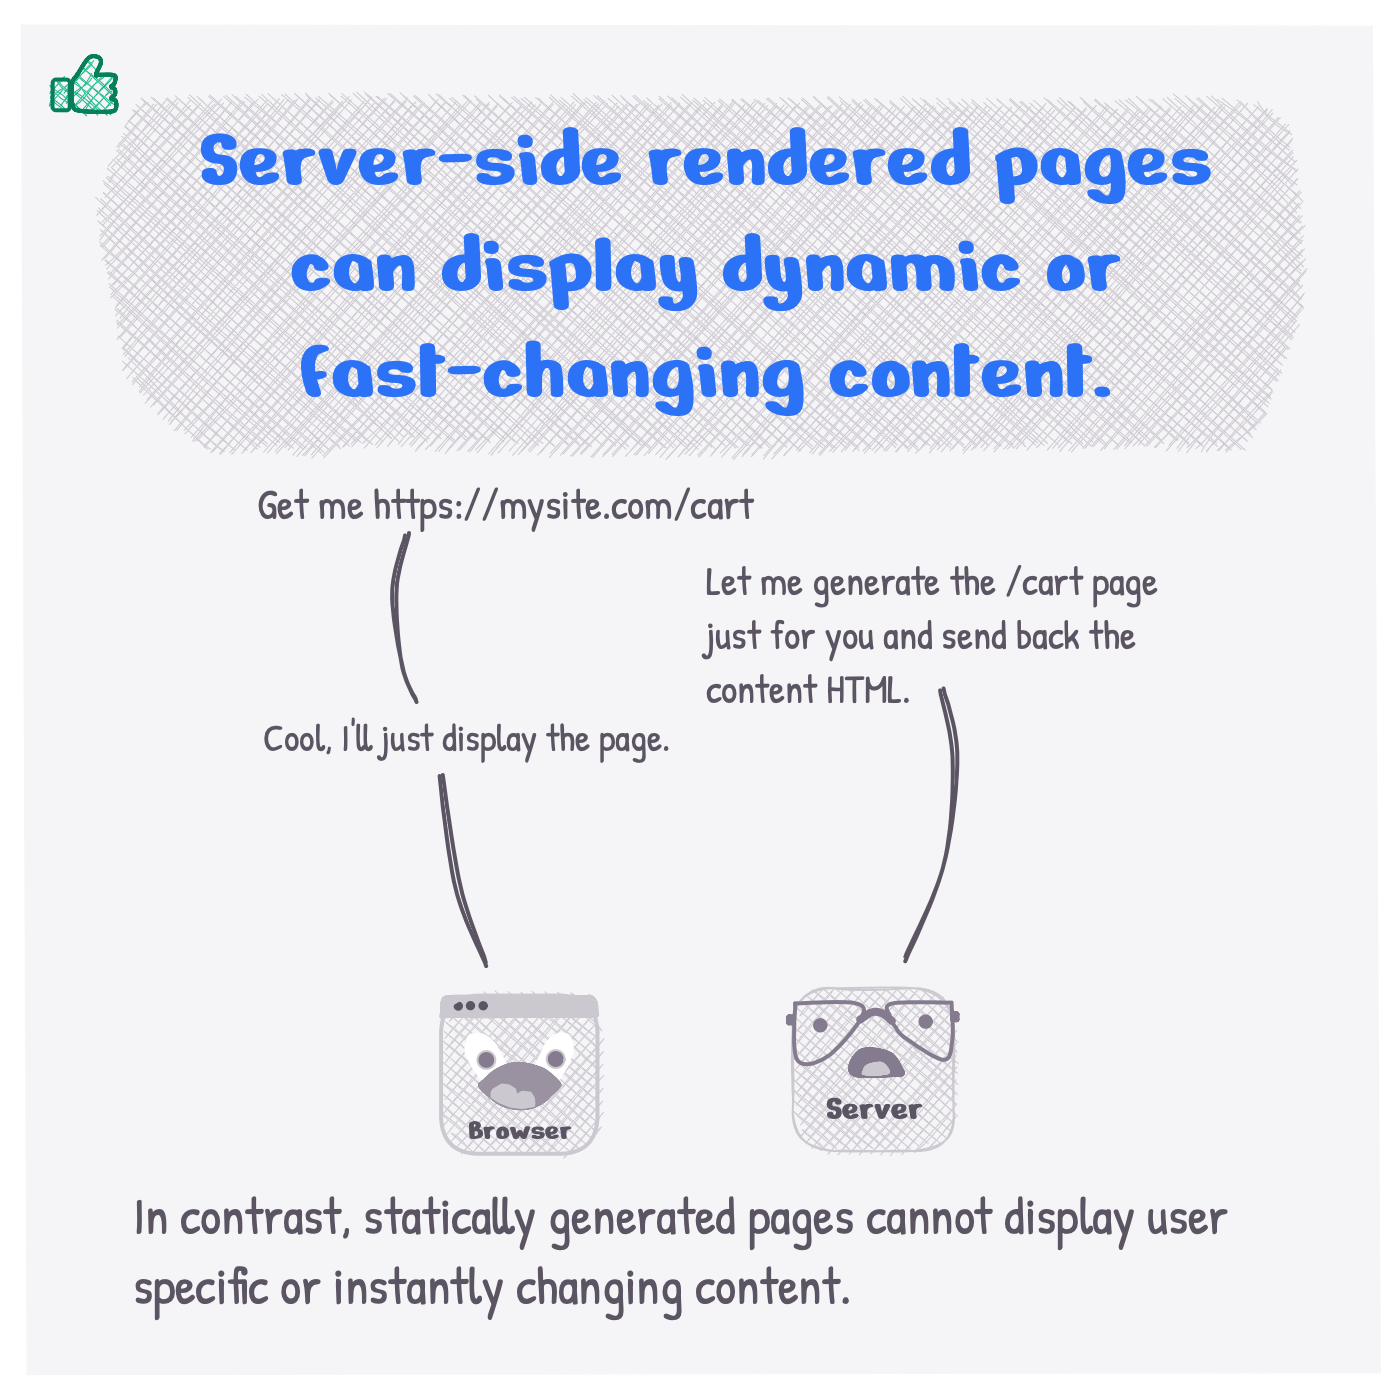 Server-side rendering can deliver dynamic & fast-changing content